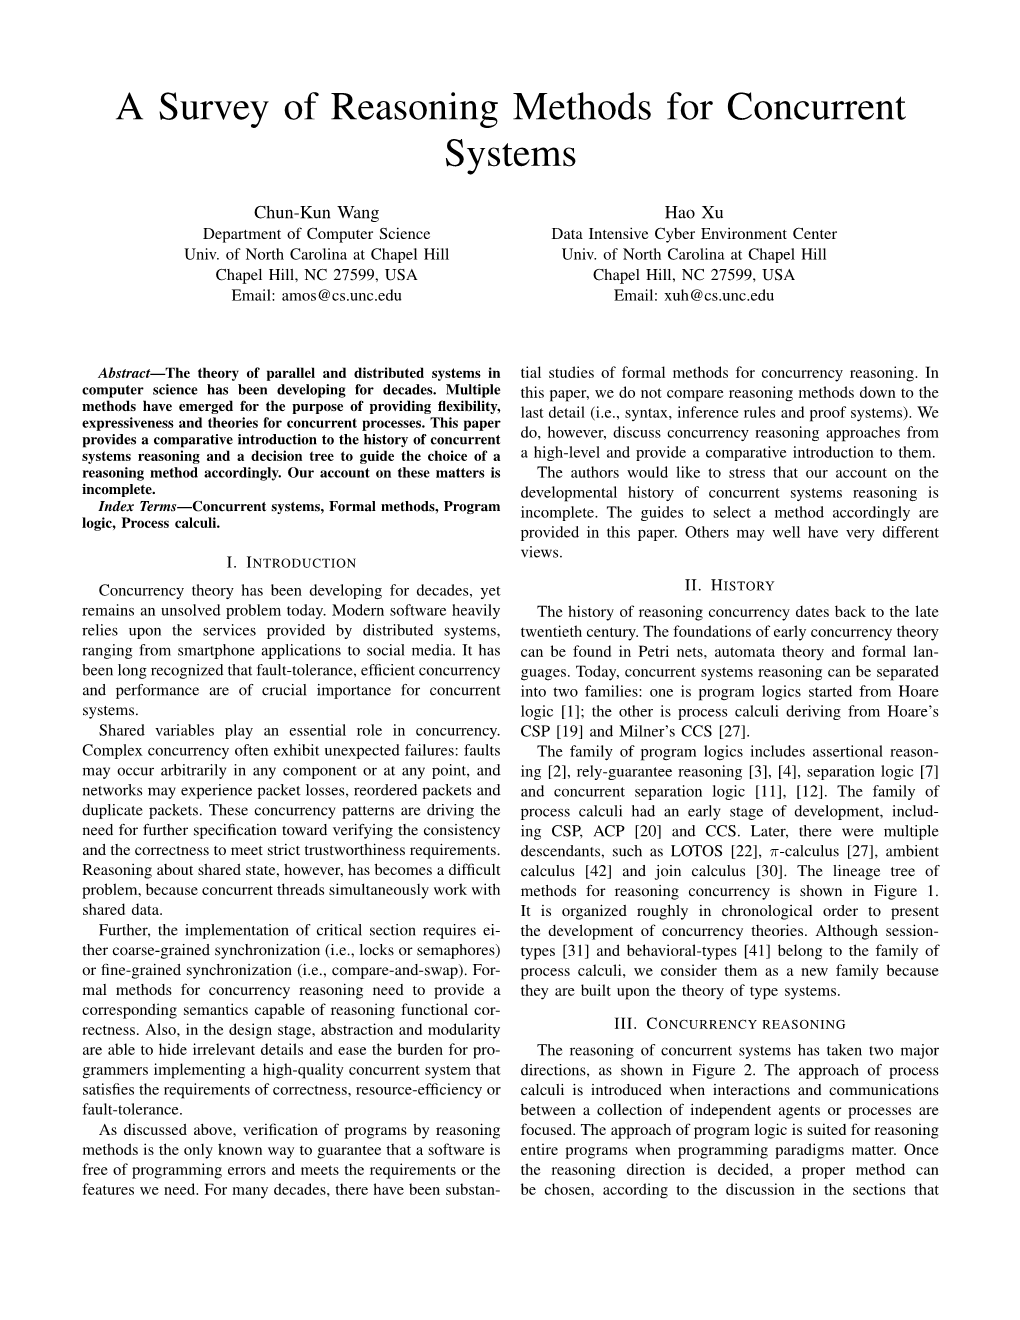 A Survey of Reasoning Methods for Concurrent Systems